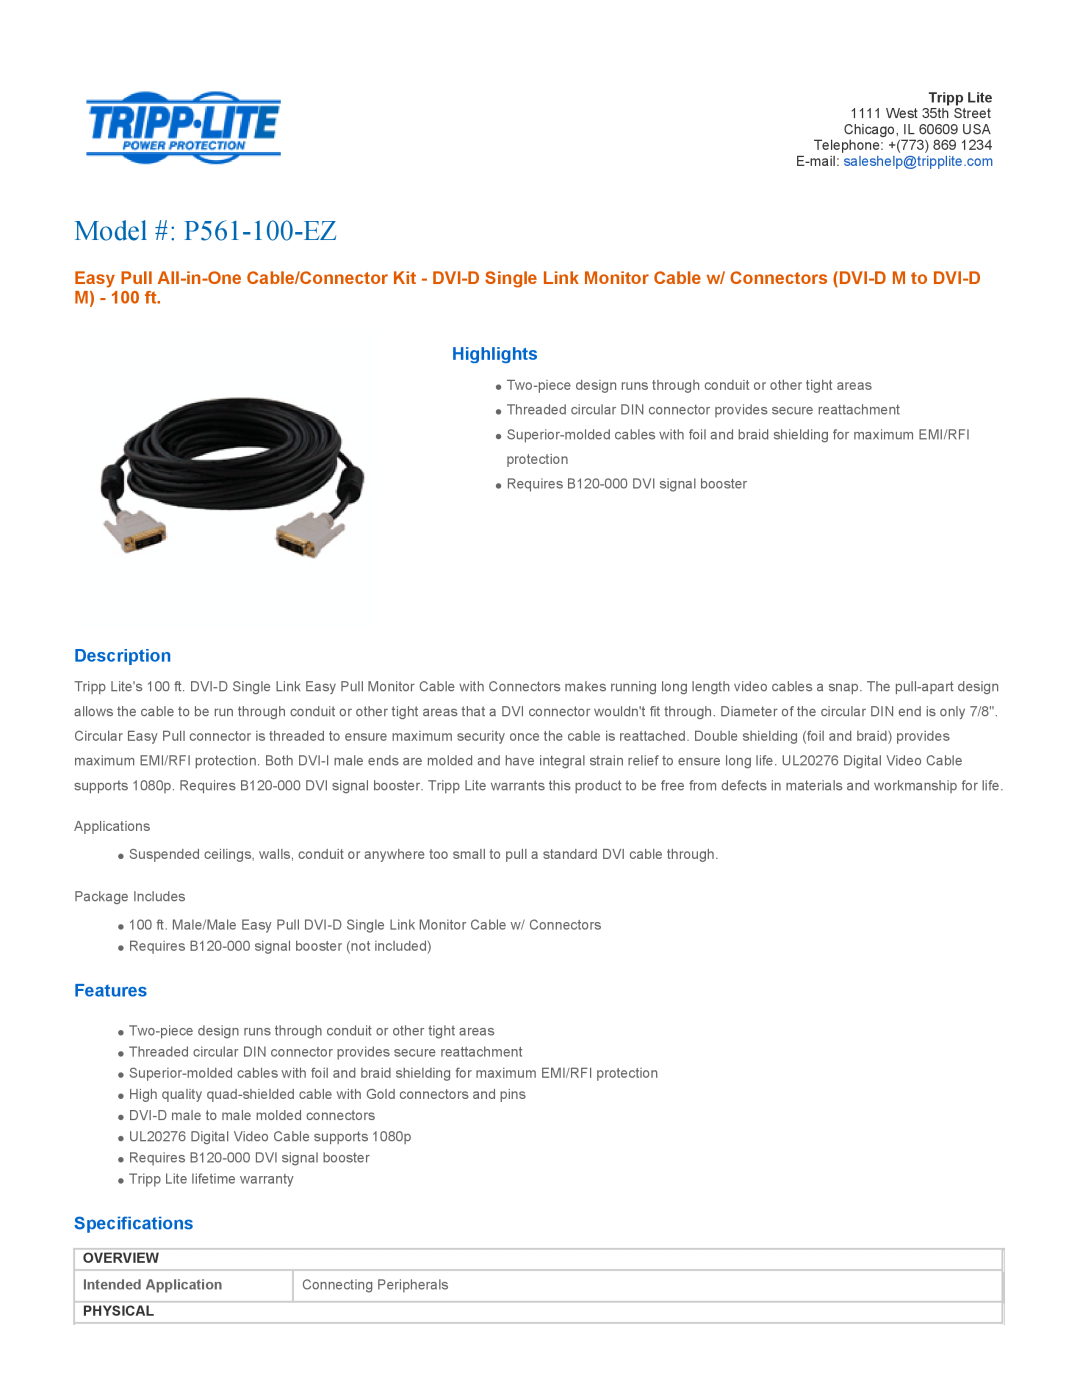 Tripp Lite P561-100-EZ specifications Highlights, Description, Features, Specifications, Overview, Intended Application 